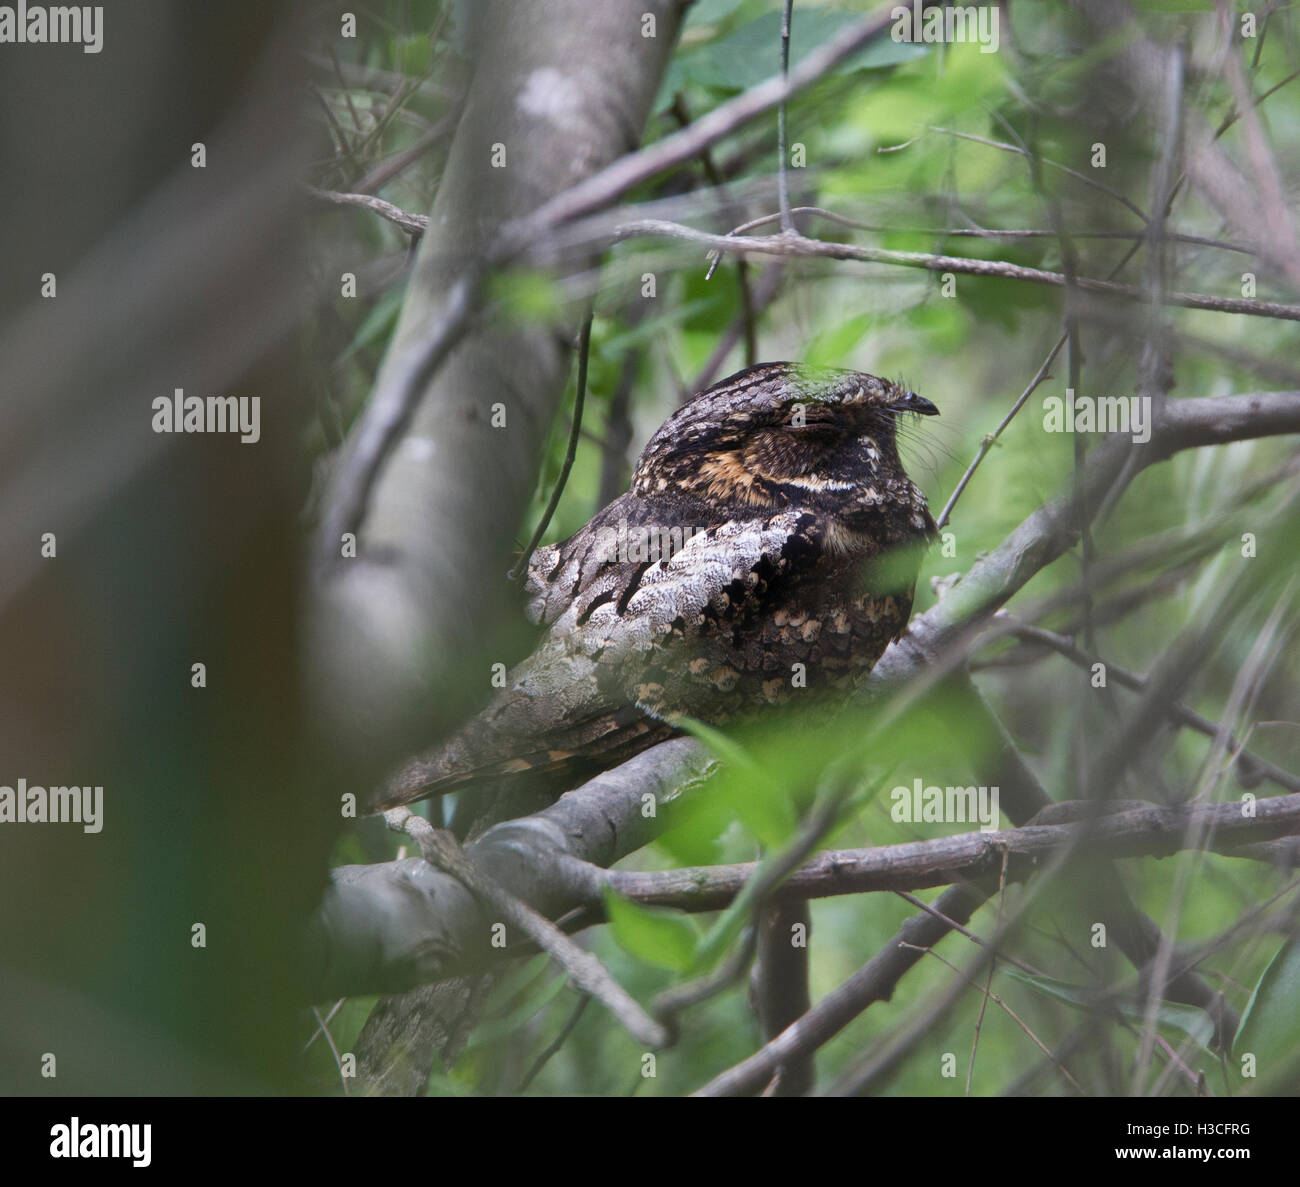 Whip-poor-will, Caprimulgus vociferus, resting in bushes at Frontera Audubon Thicket, Weslaco, Texas during migration Stock Photo